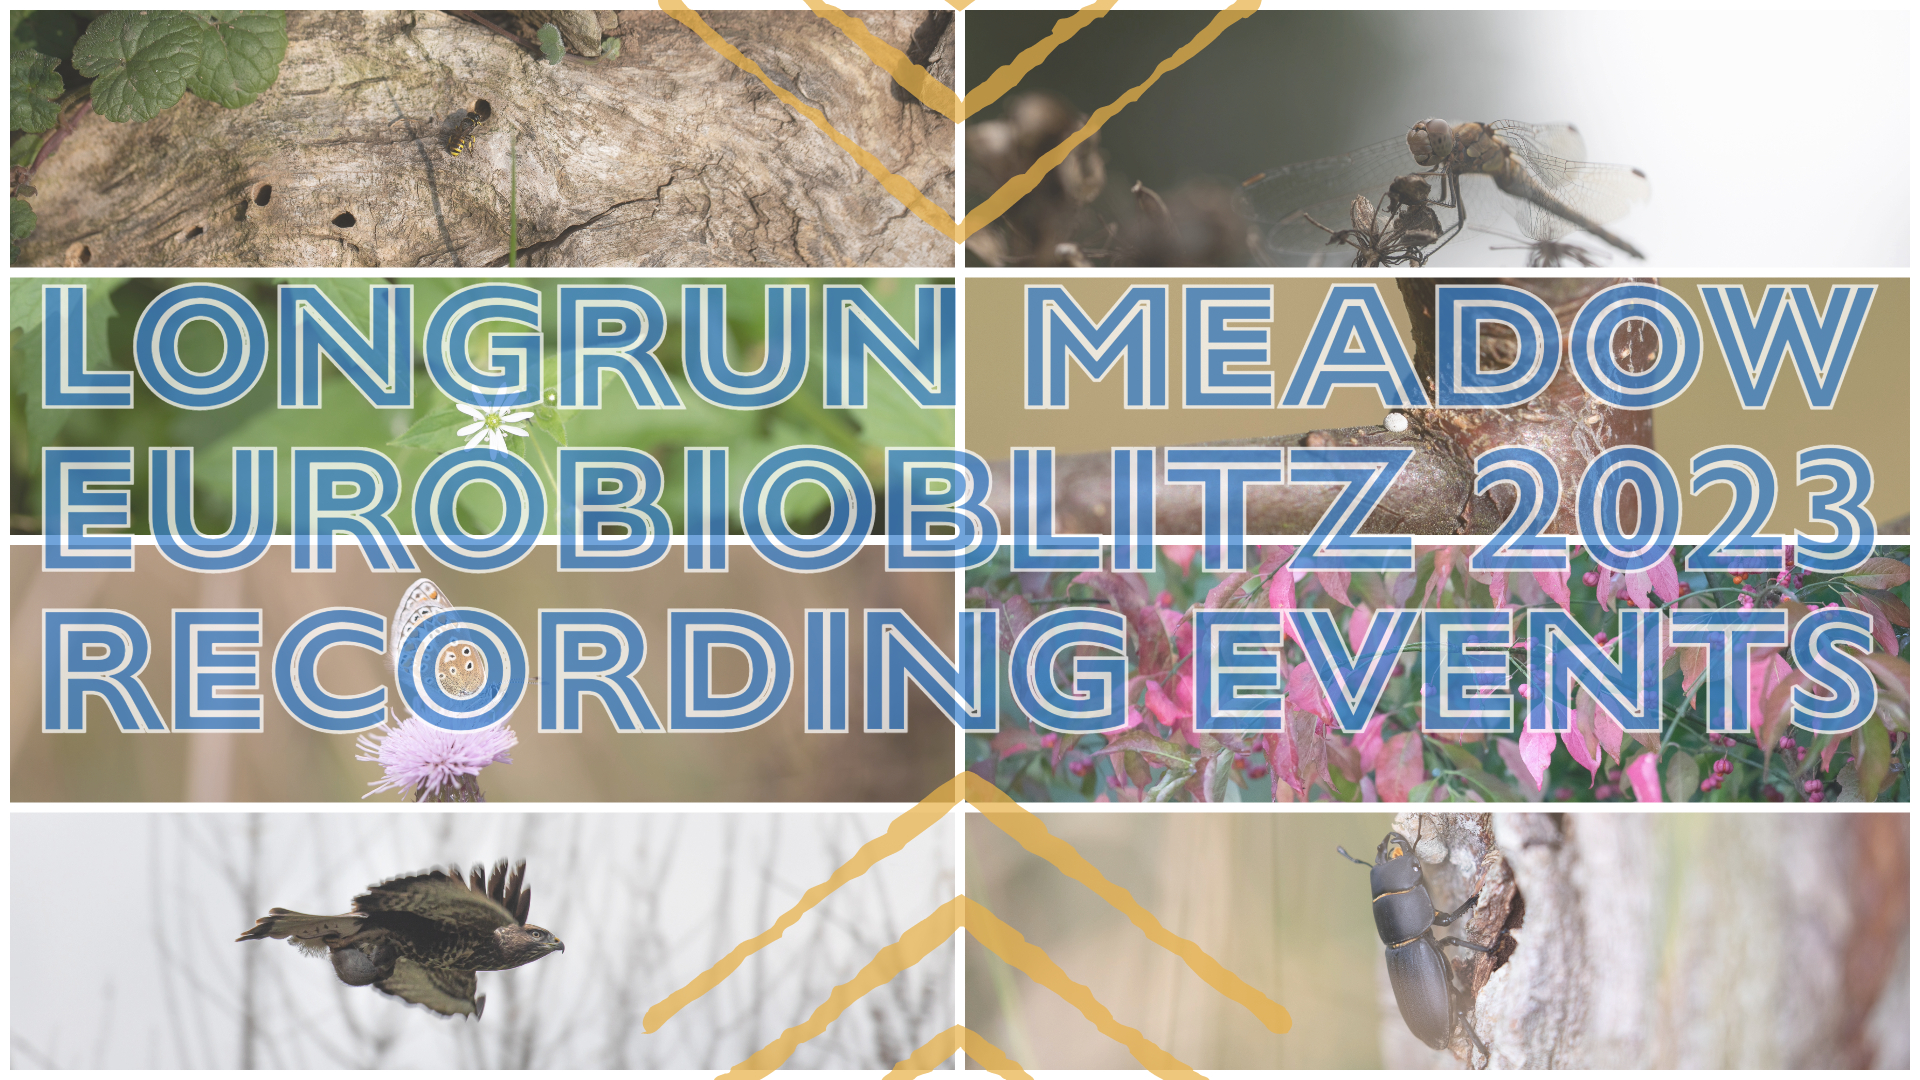 A collage of wildlife pictures with the words "Longrun Meadow EuroBioBlitz 2023 Recording Events" superimposed over the middle in blue.